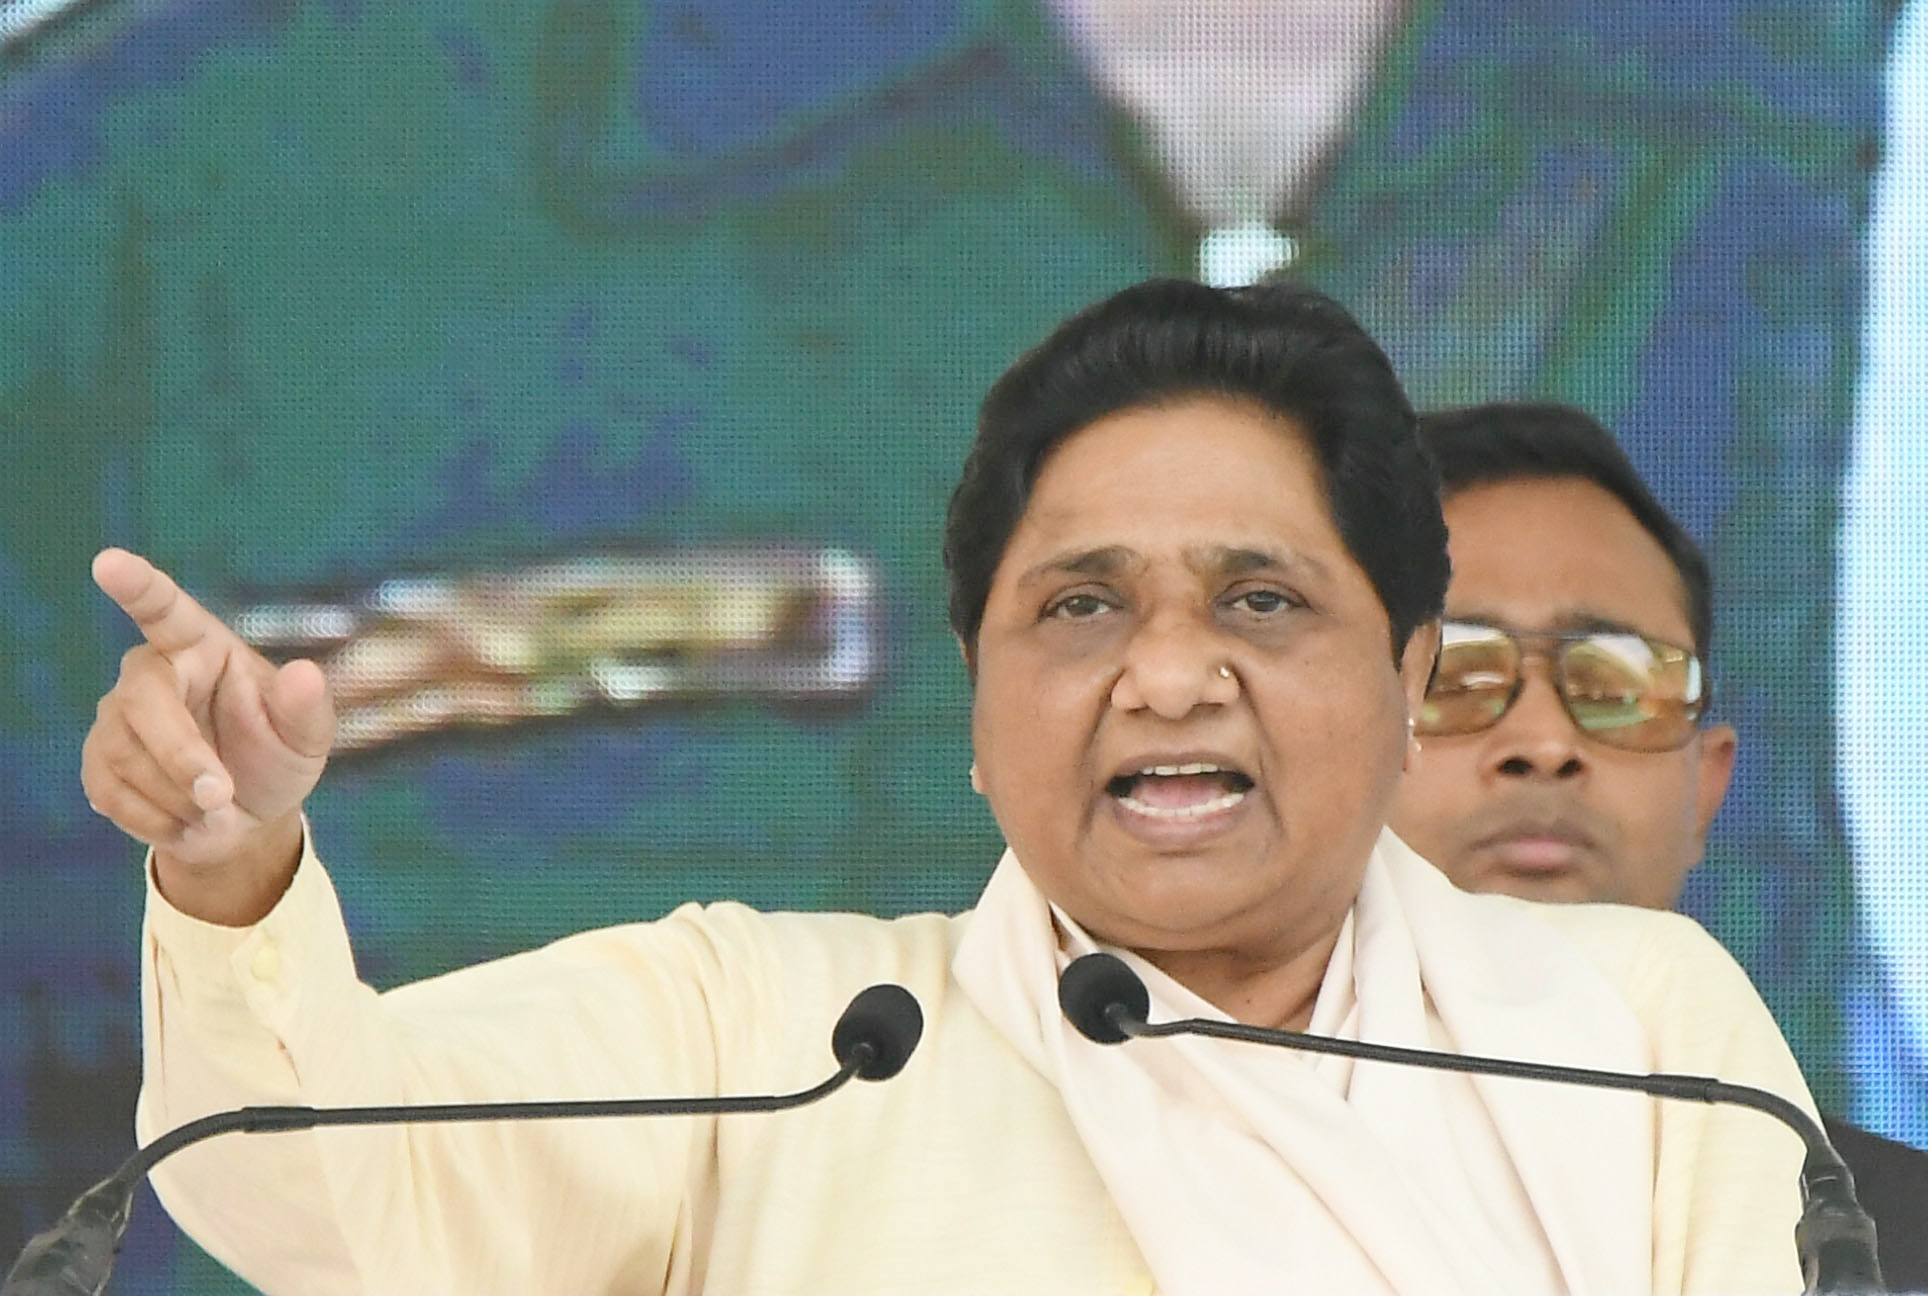 Mayawati supports Azam Khan, accuses UP govt of targeting opponents